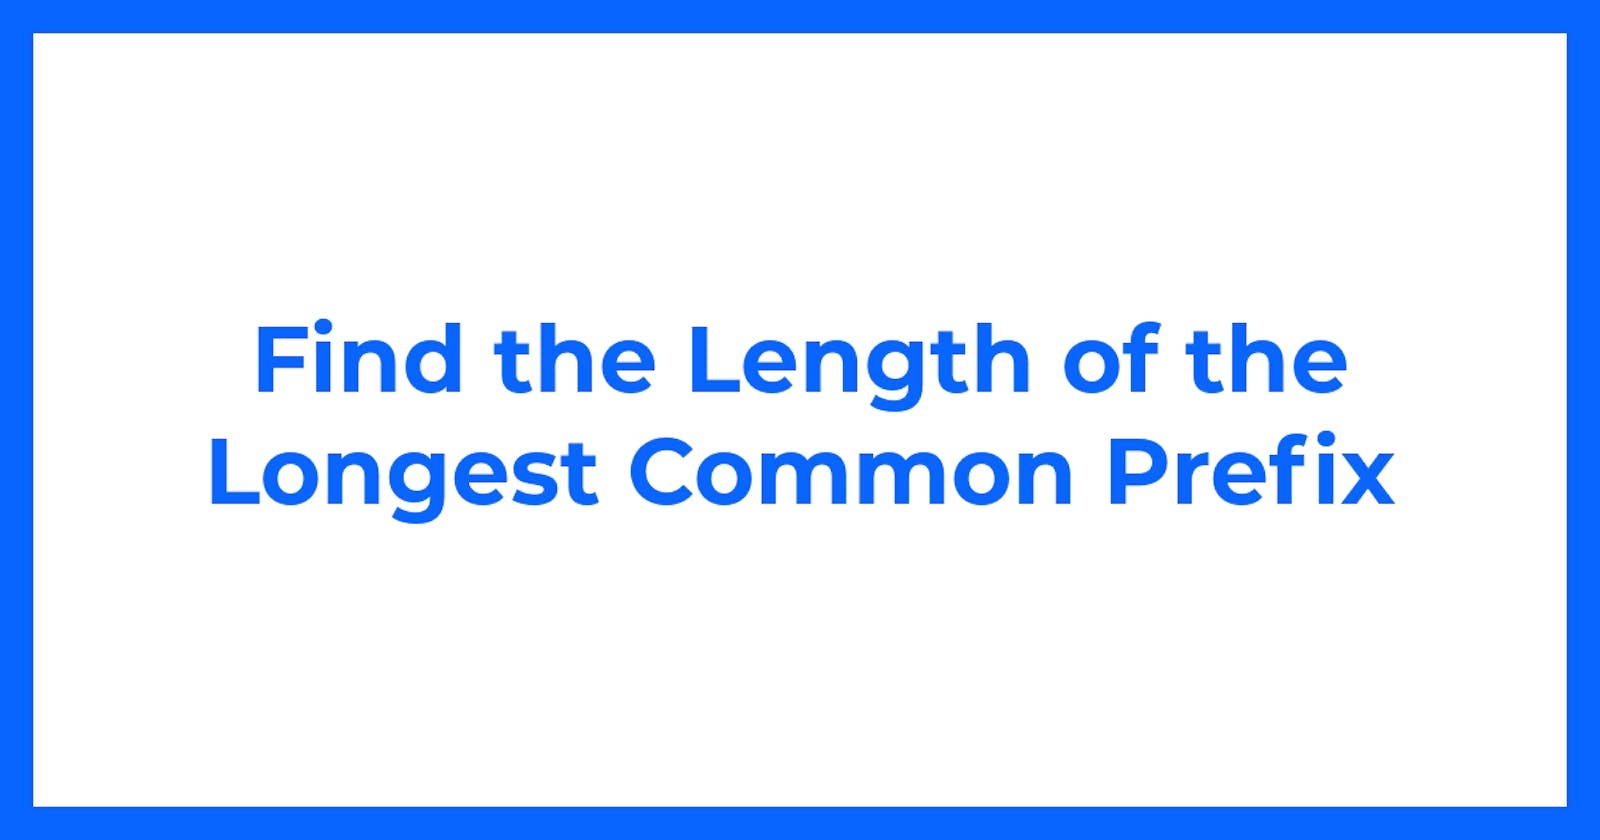 Find the Length of the Longest Common Prefix